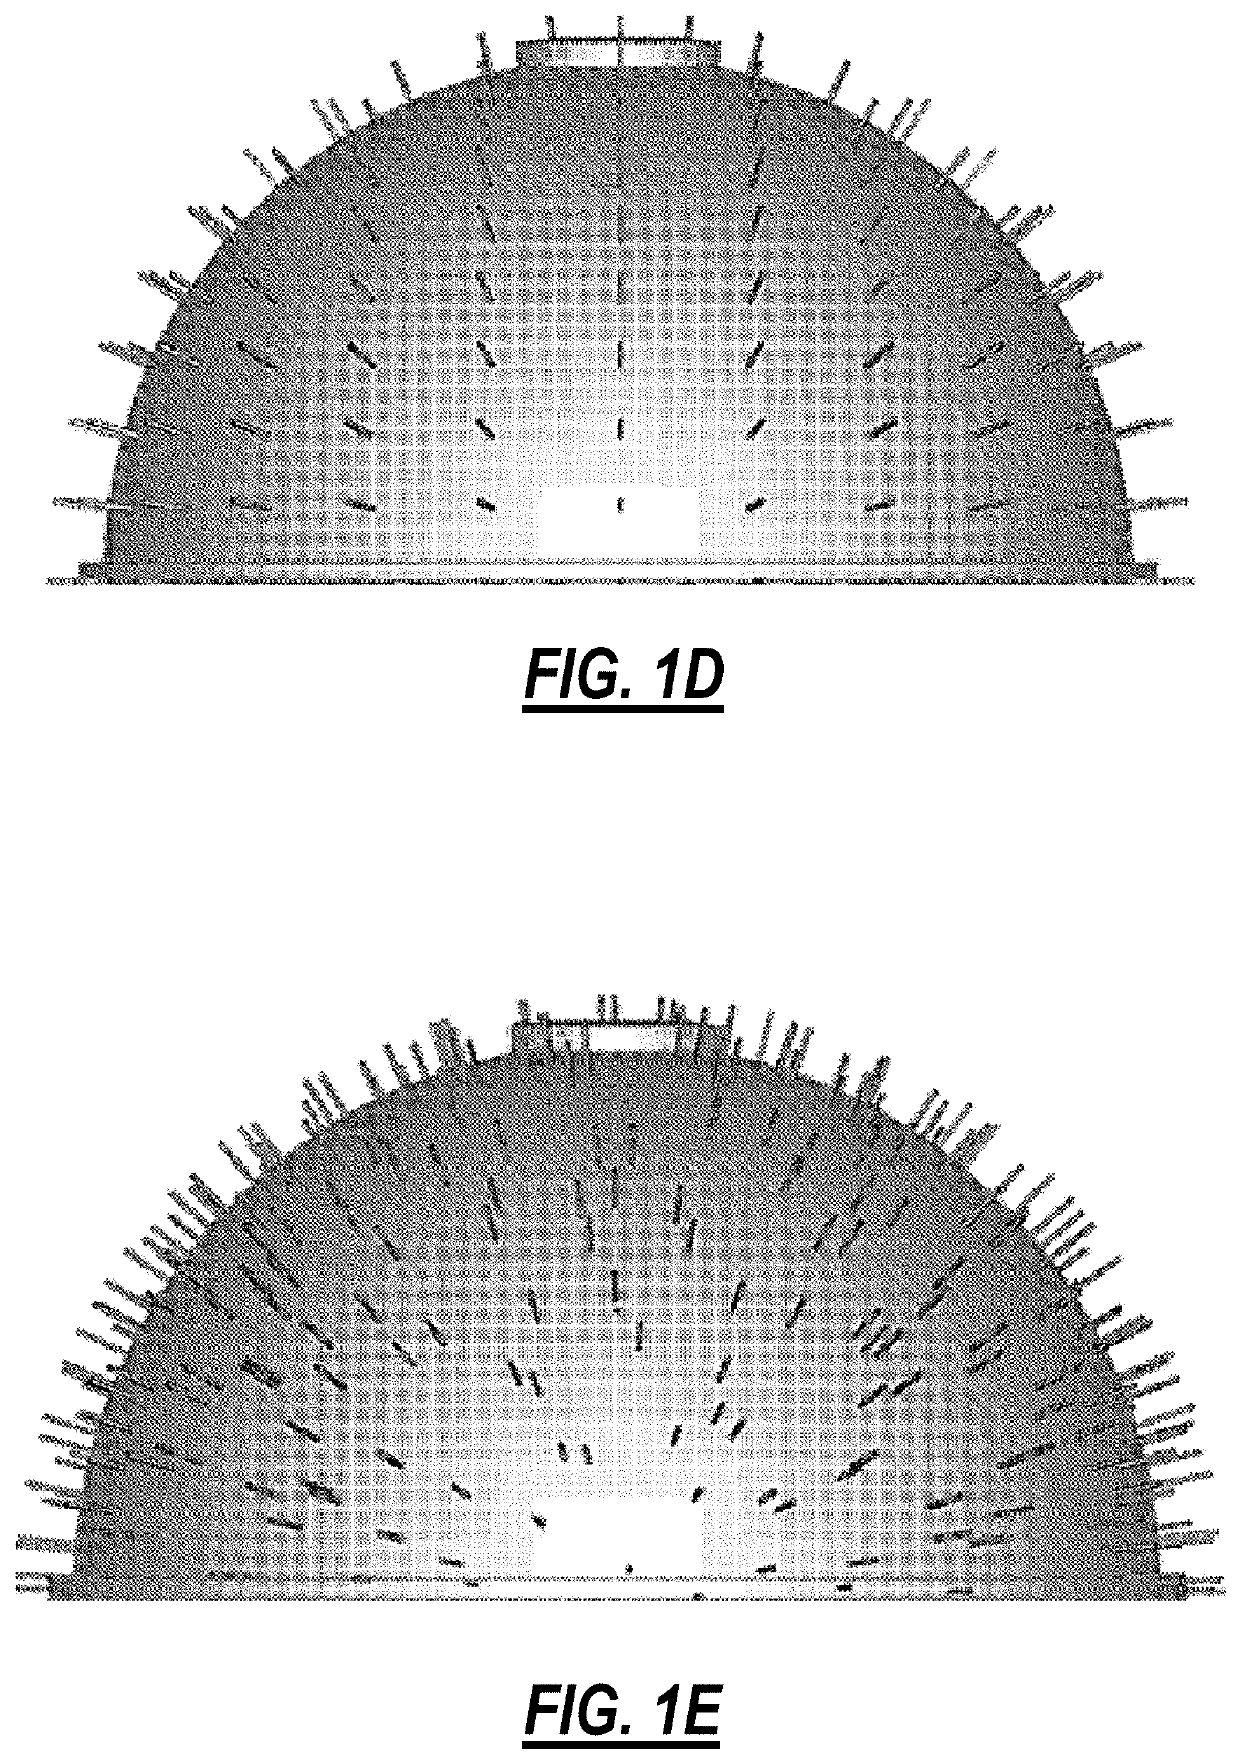 Surgical implant devices incorporating porous surfaces